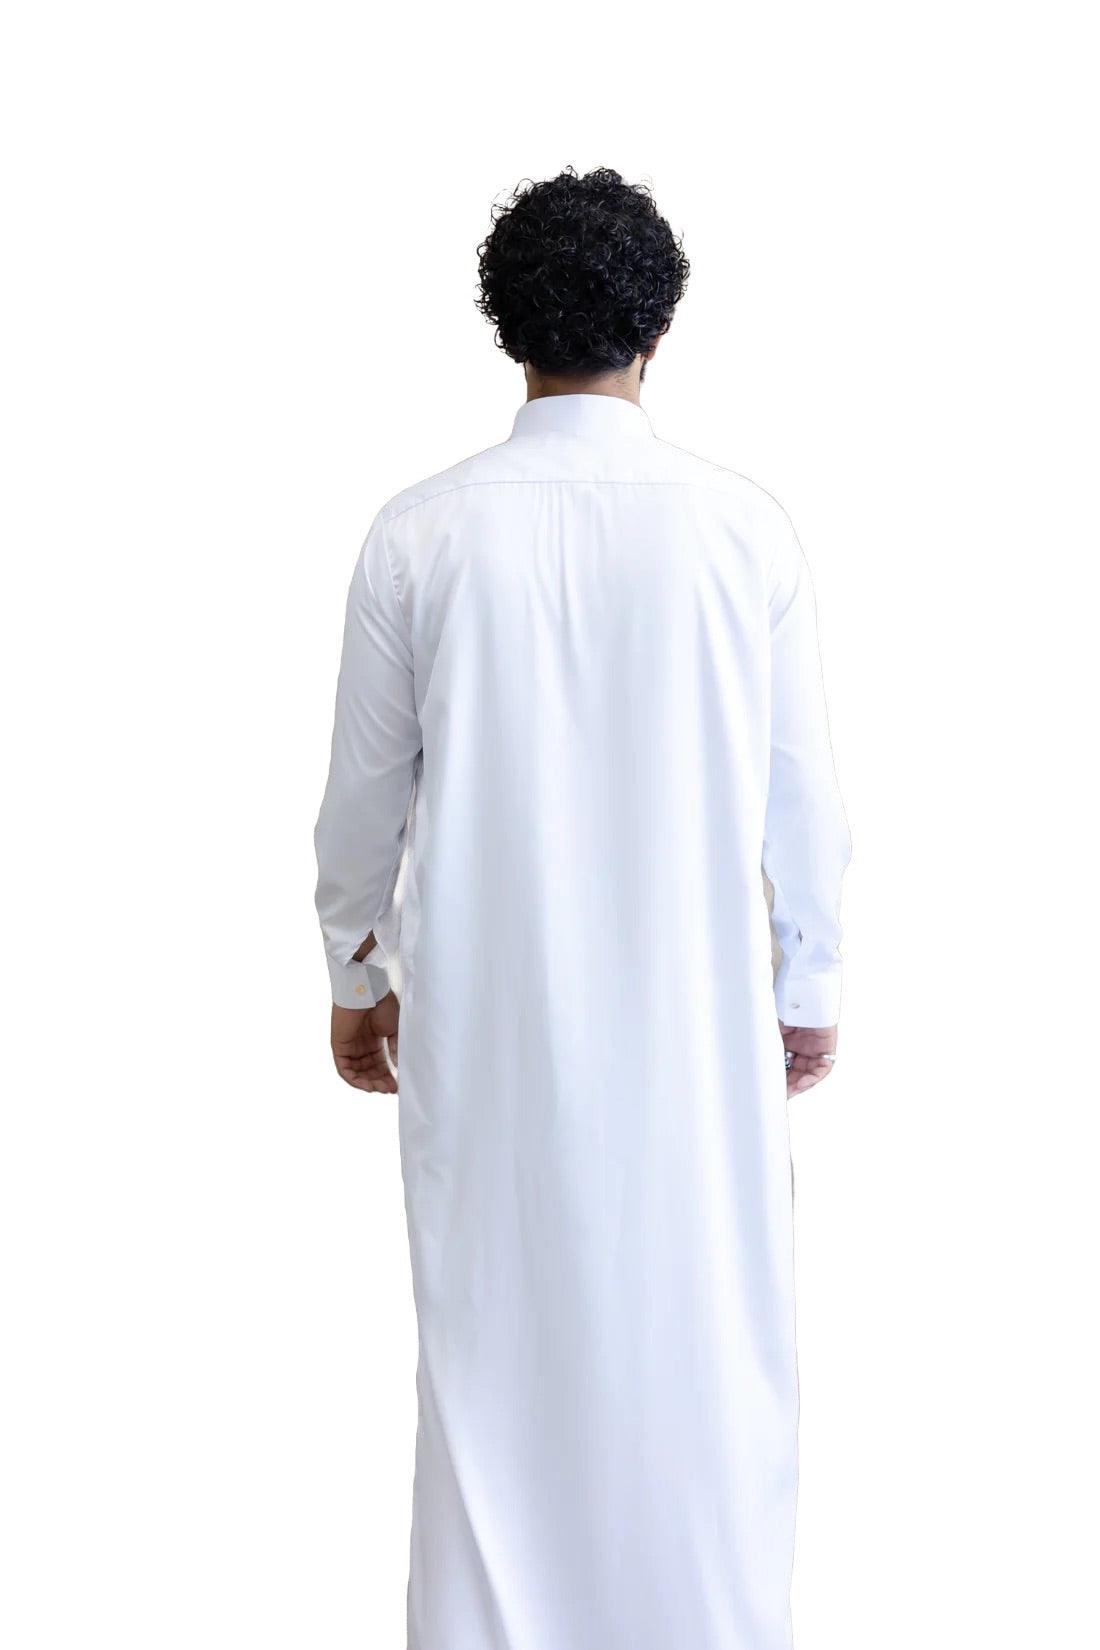 a man in a white shirt standing in a white dress 